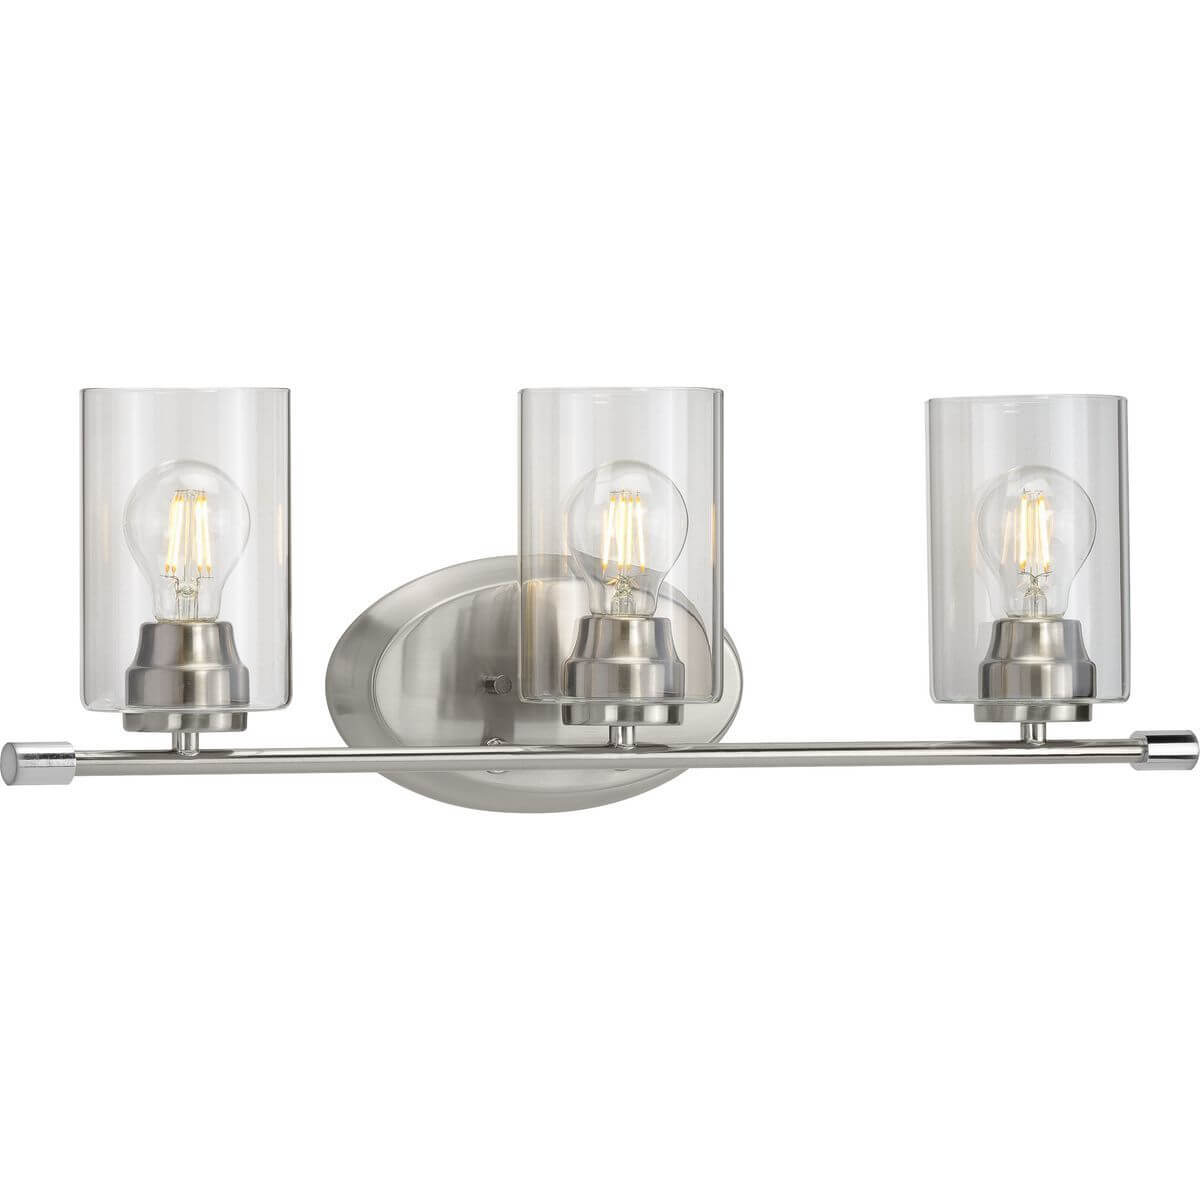 Progress Lighting Riley 3 Light 25 inch Bath Vanity Light in Brushed Nickel with Clear Glass P300278-009